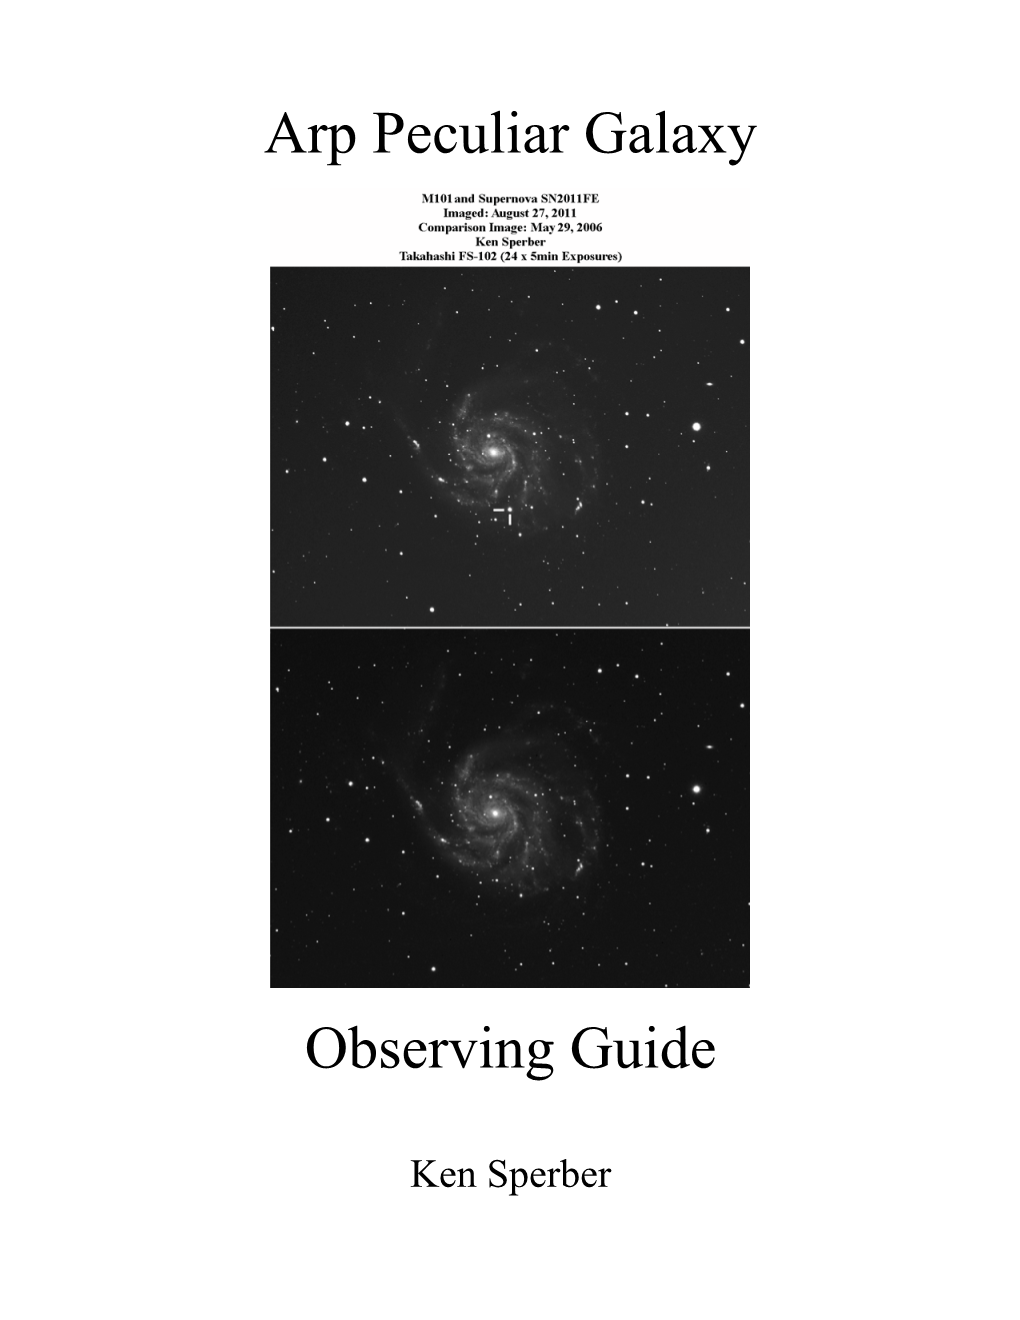 Arp Peculiar Galaxy Observing Guide